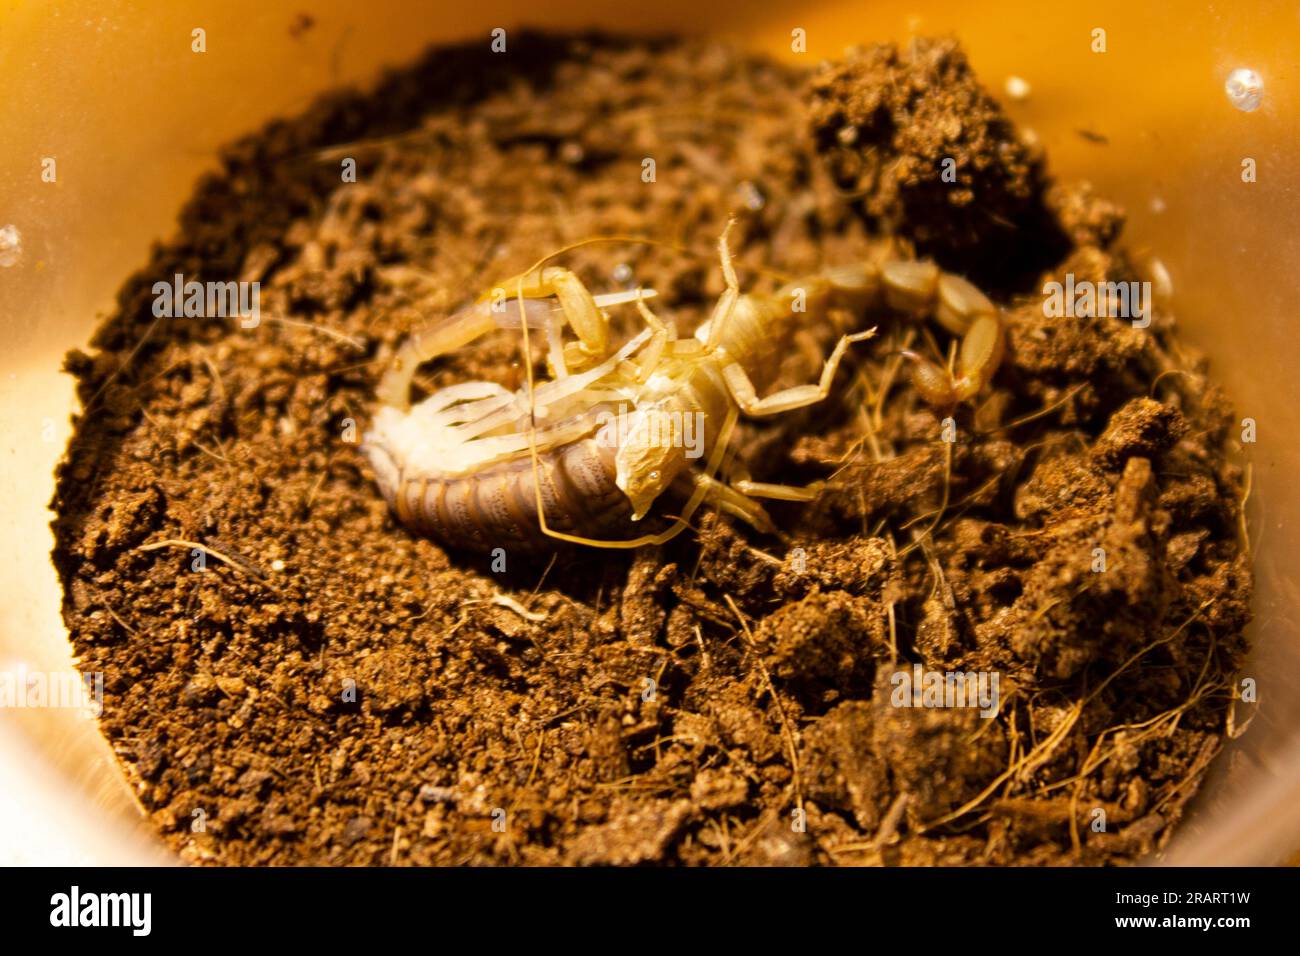 scorpion Hottentotta hottentotta moult. poisonous insect from Africa. Stock Photo